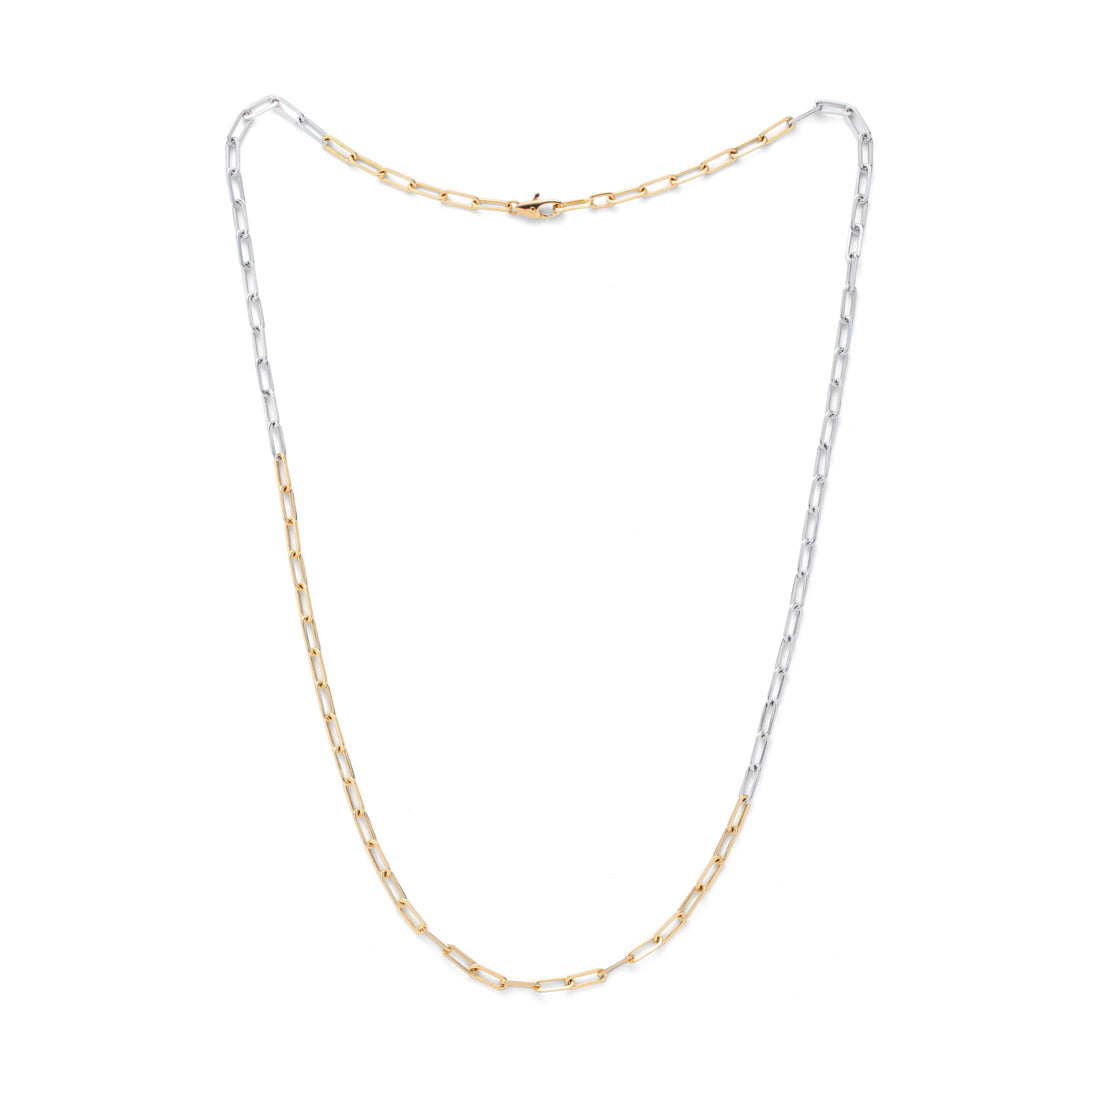 18K　Necklace　ネックレス　Long Link Chain　ロングリンクチェーン　combination　コンビネーション